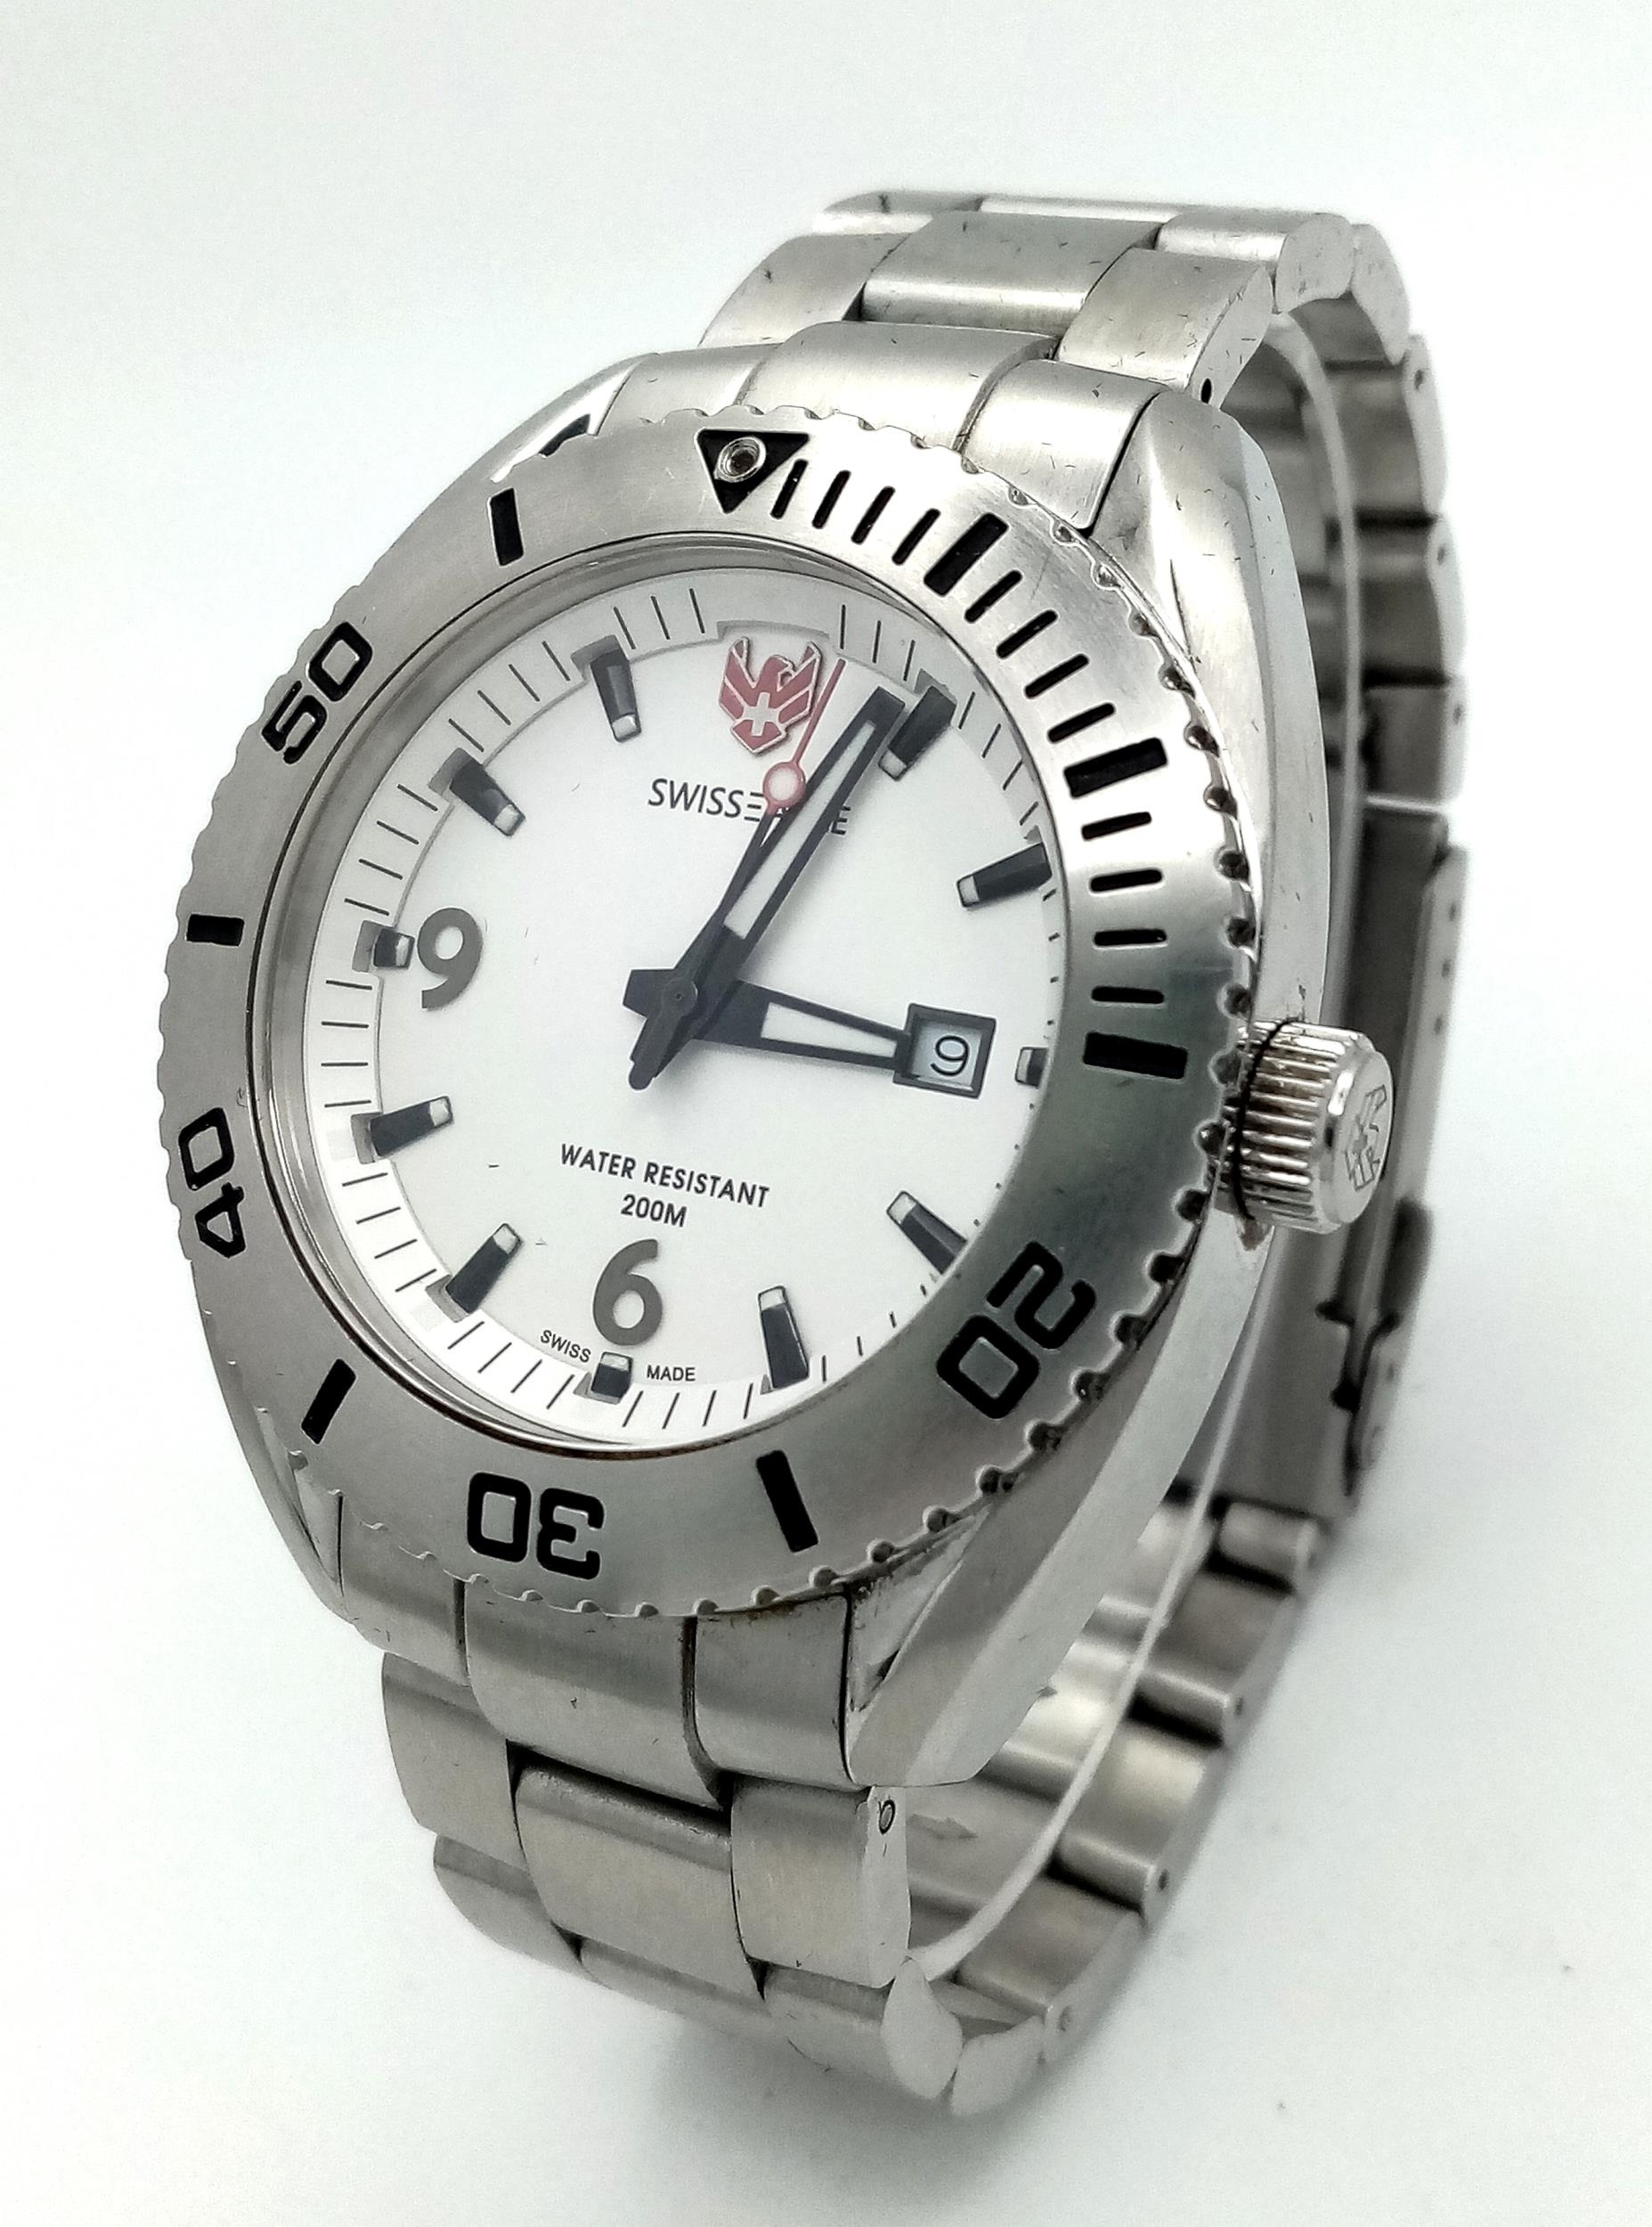 A Men’s Swiss Eagle Stainless Steel Date Watch. 44mm Case. Very Good Condition, New Battery Fitted